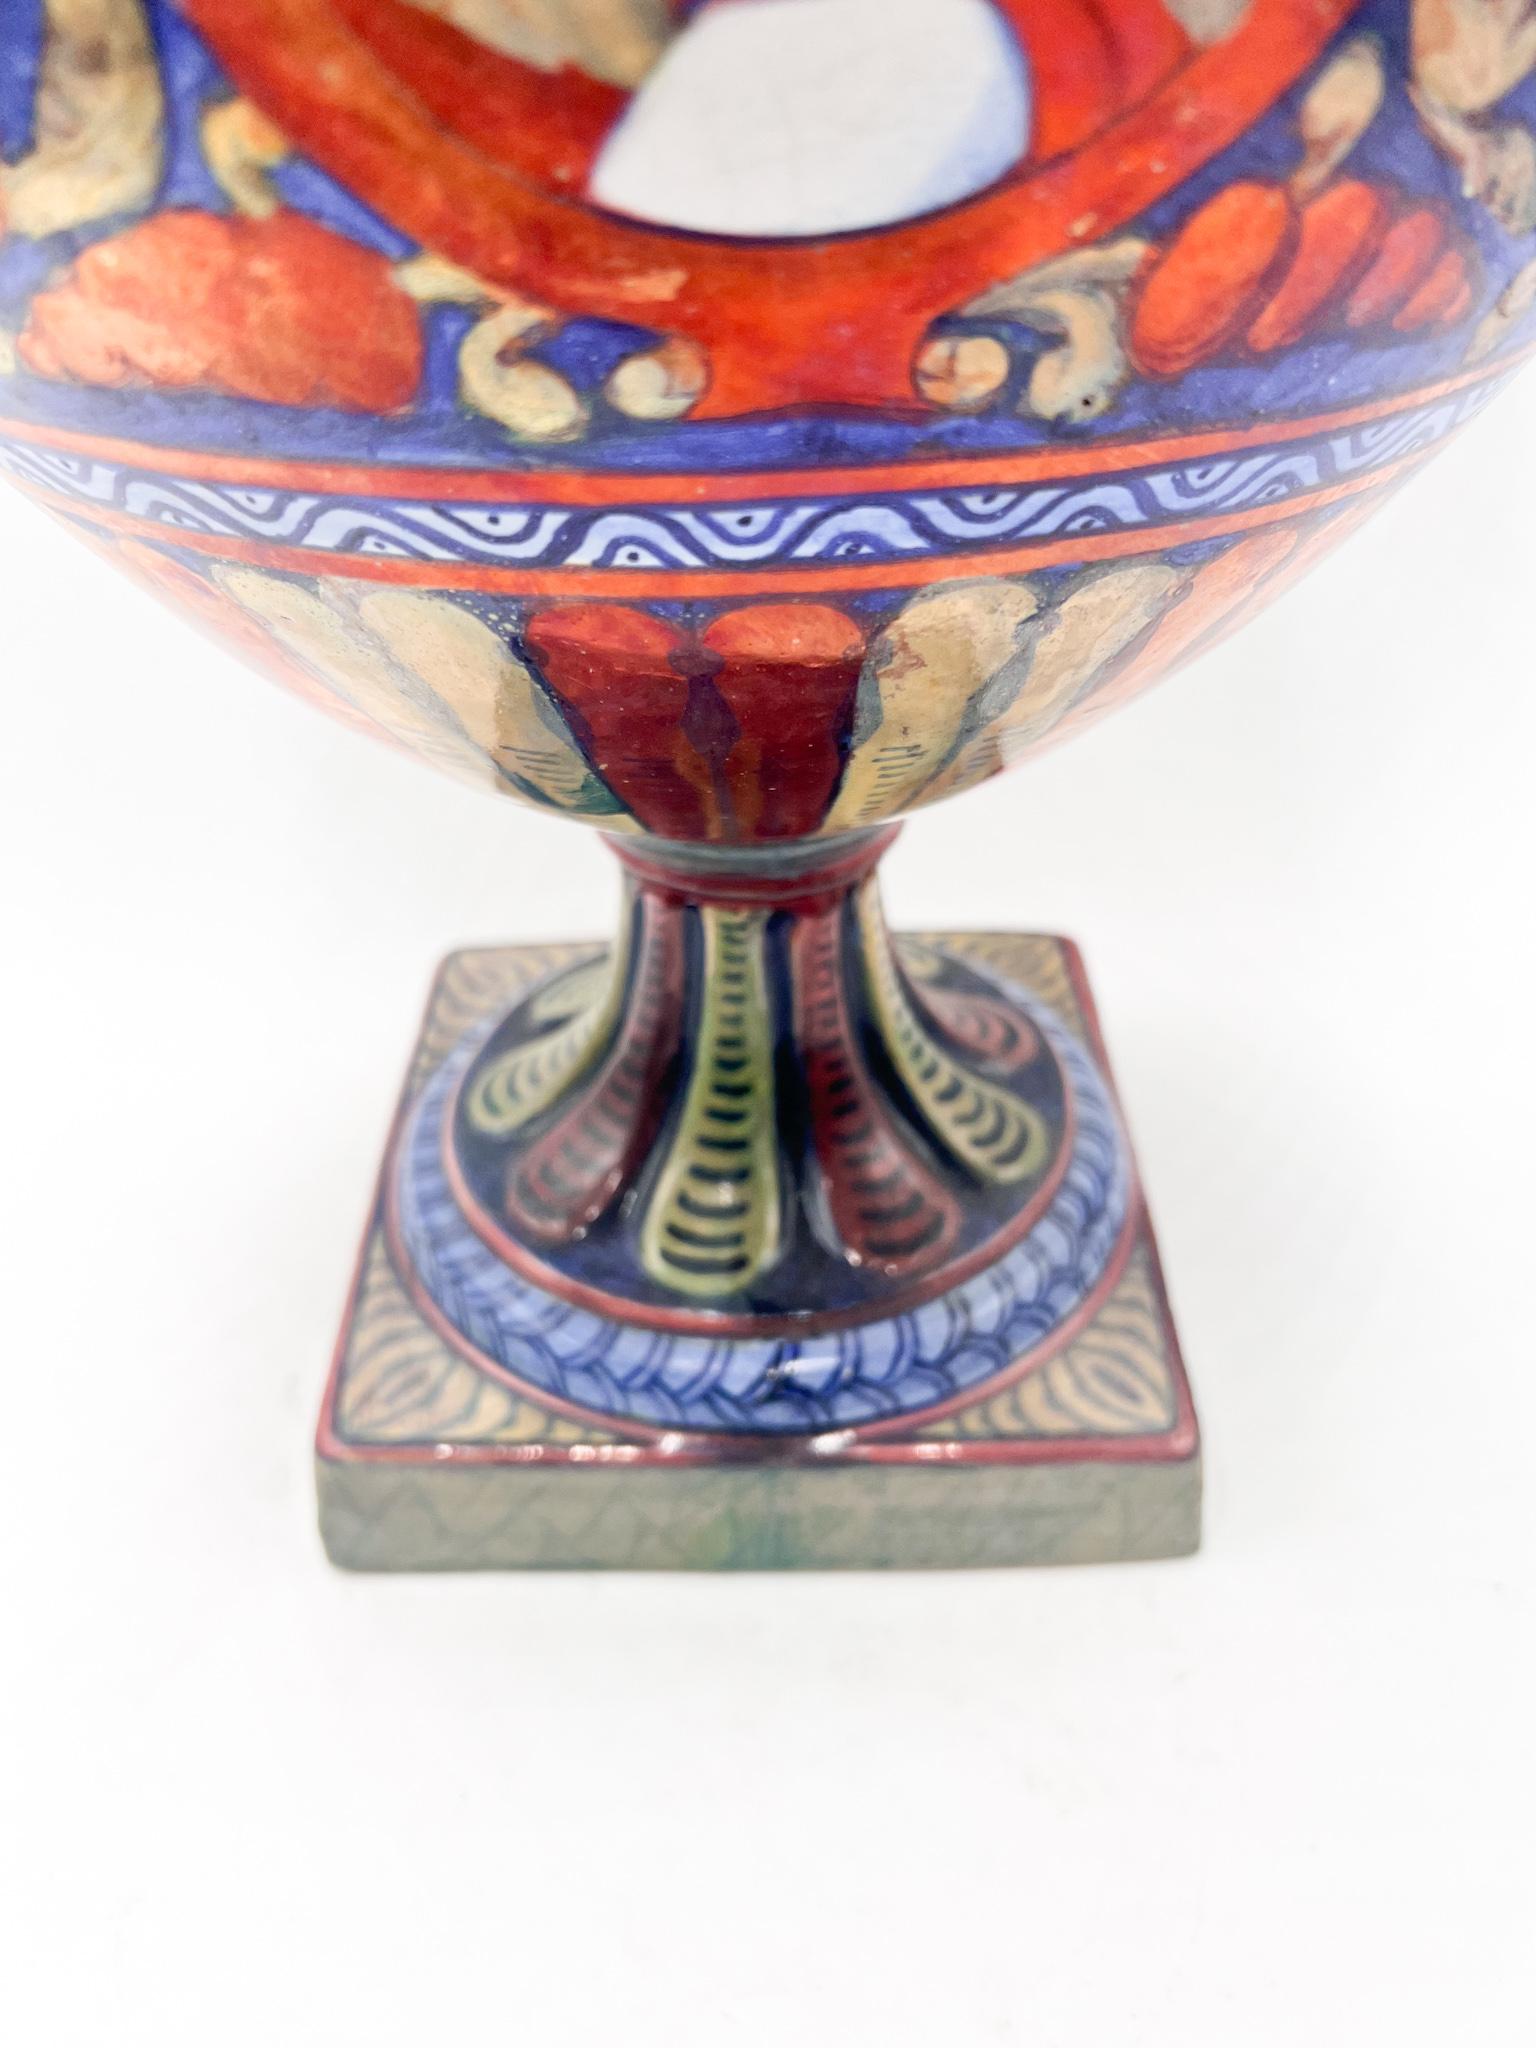 Neoclassical Early 20th Century Ceramic Vase by Gualdo Tadino For Sale